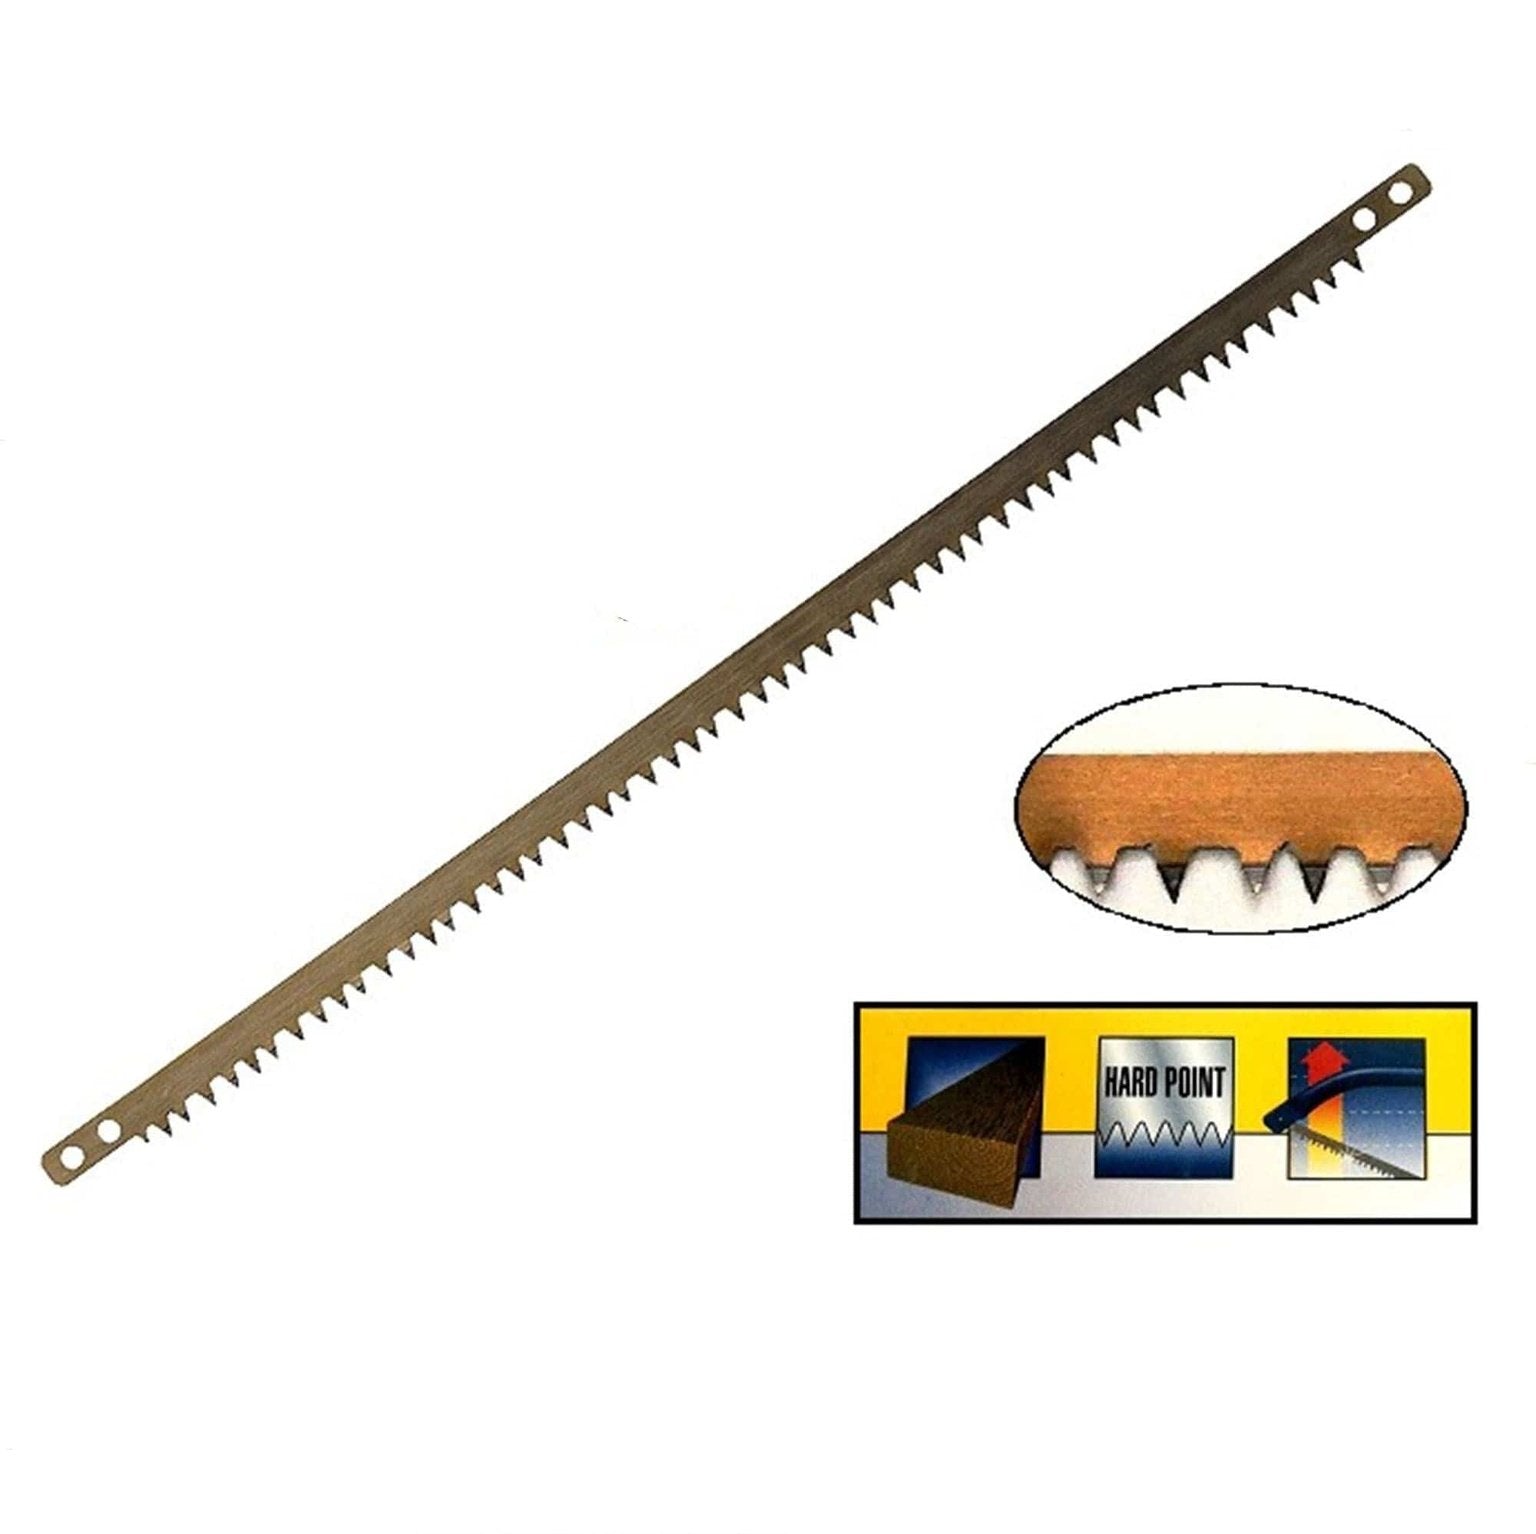 Irwin Xpert Bow Saw Blade for Dry Wood | Supply Master Accra, Ghana Hand Saws & Cutting Tools Buy Tools hardware Building materials